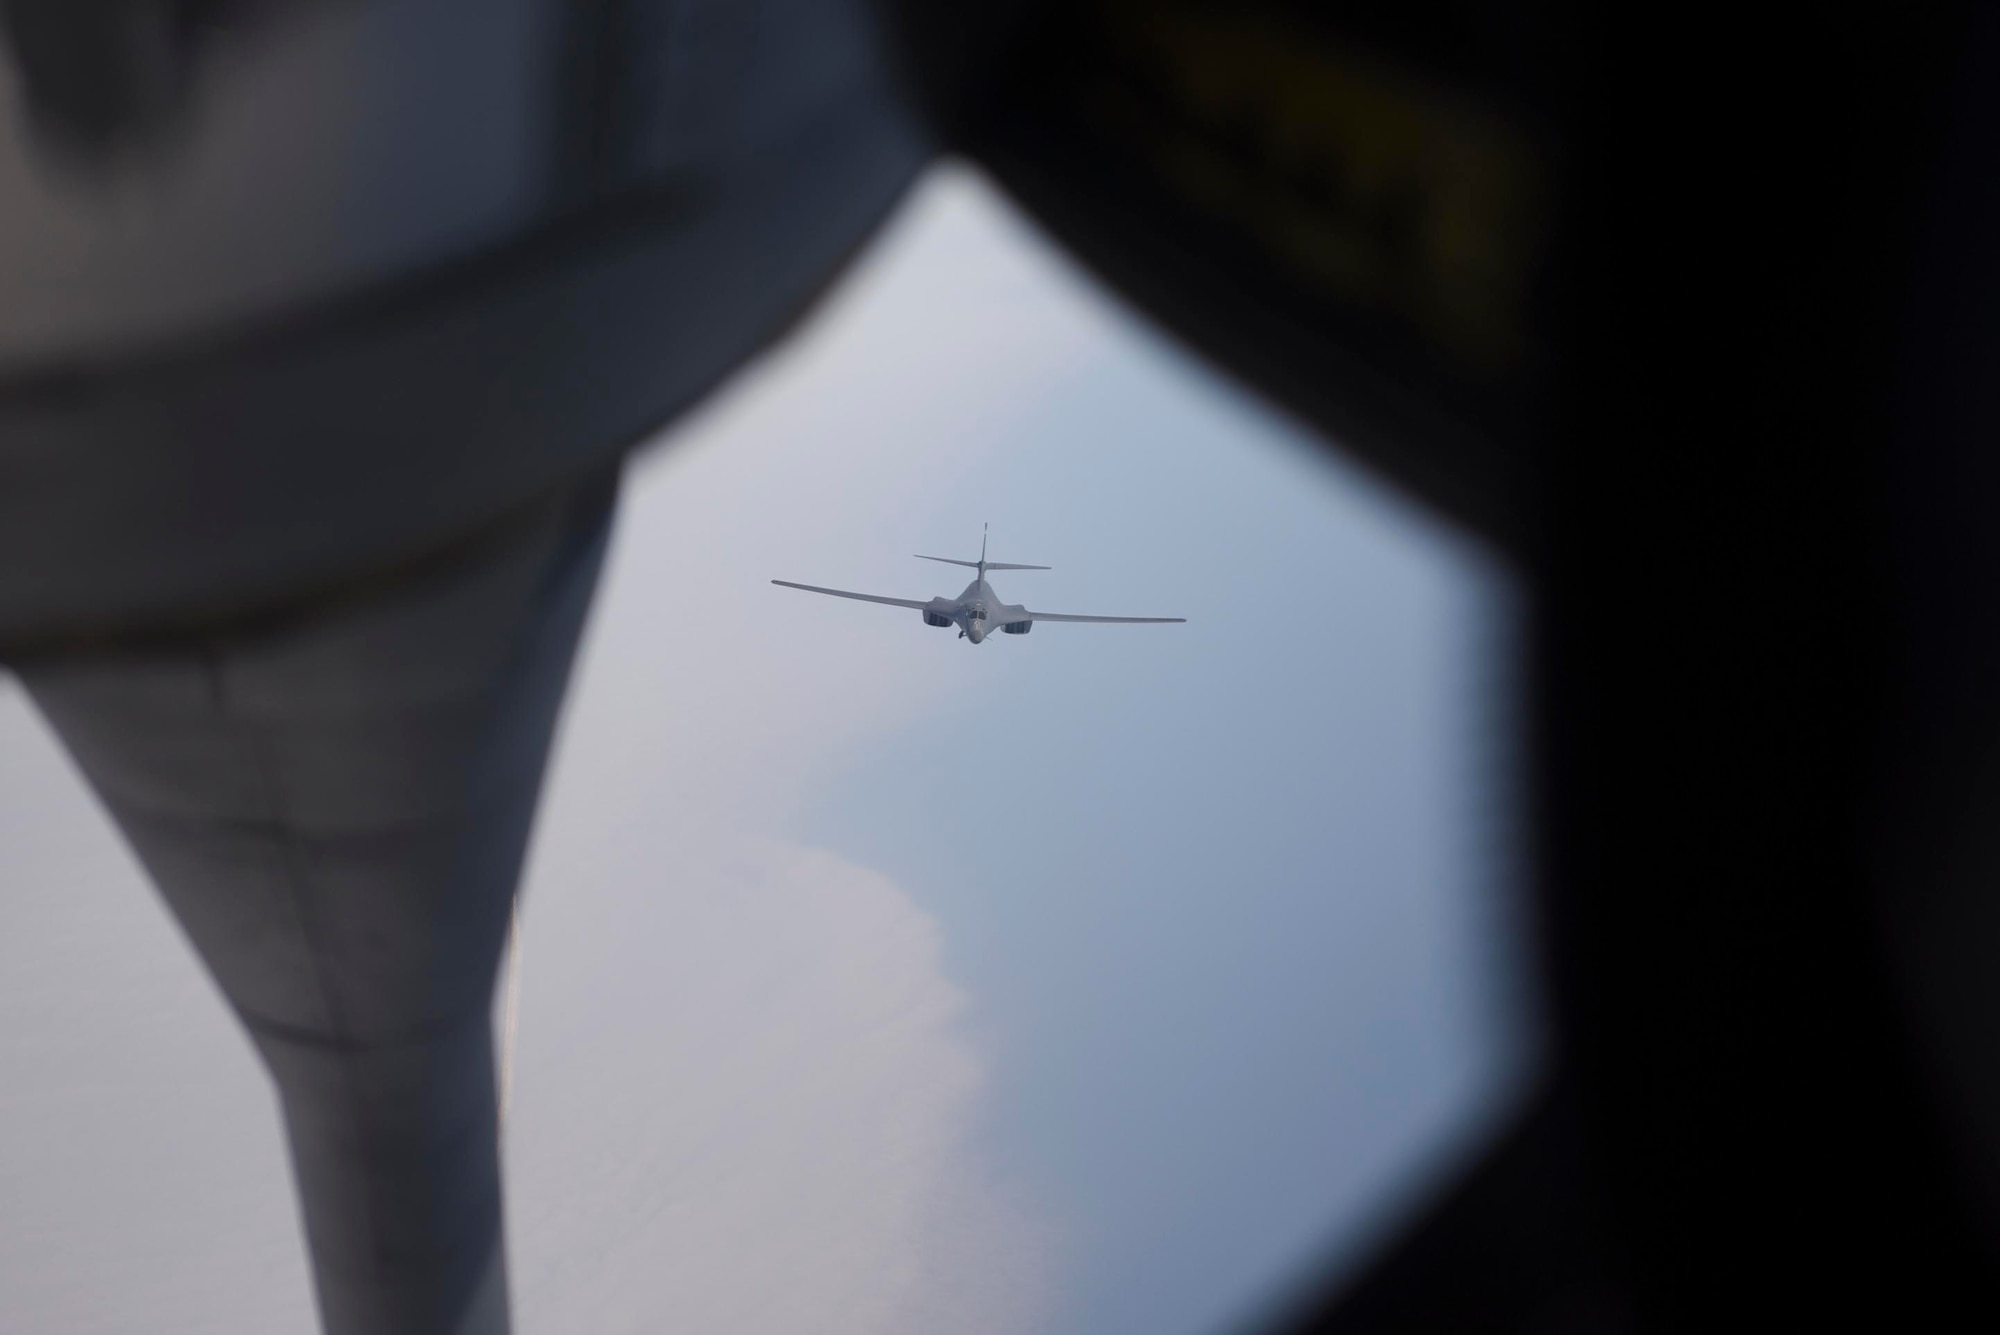 A U.S. Air Force B-1B Lancer aircraft assigned to the 7th Bomb Wing, Dyess Air Force Base, Texas, approaches a KC-135 Stratotanker aircraft assigned to the 100th Air Refueling Wing, Royal Air Force Mildenhall, England, to receive fuel during a Bomber Task Force mission over the North Sea, March 3, 2021. RAF Mildenhall’s aerial refueling capabilities enable strategic bombers to contribute to stability in the European theater. (U.S. Air Force photo by Senior Airman Joseph Barron)